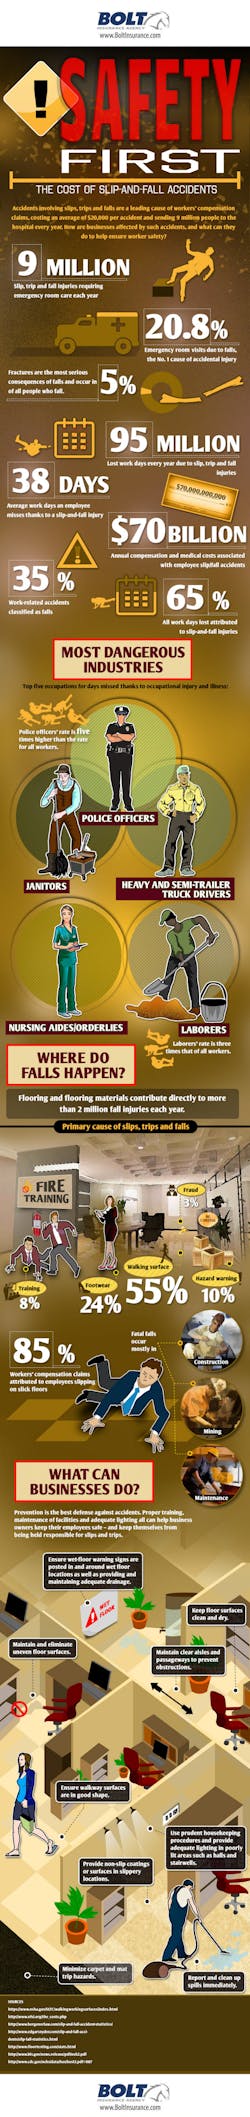 Ehstoday Com Sites Ehstoday com Files Uploads 2013 07 Cost Of Slip And Fall Accidents Infographic